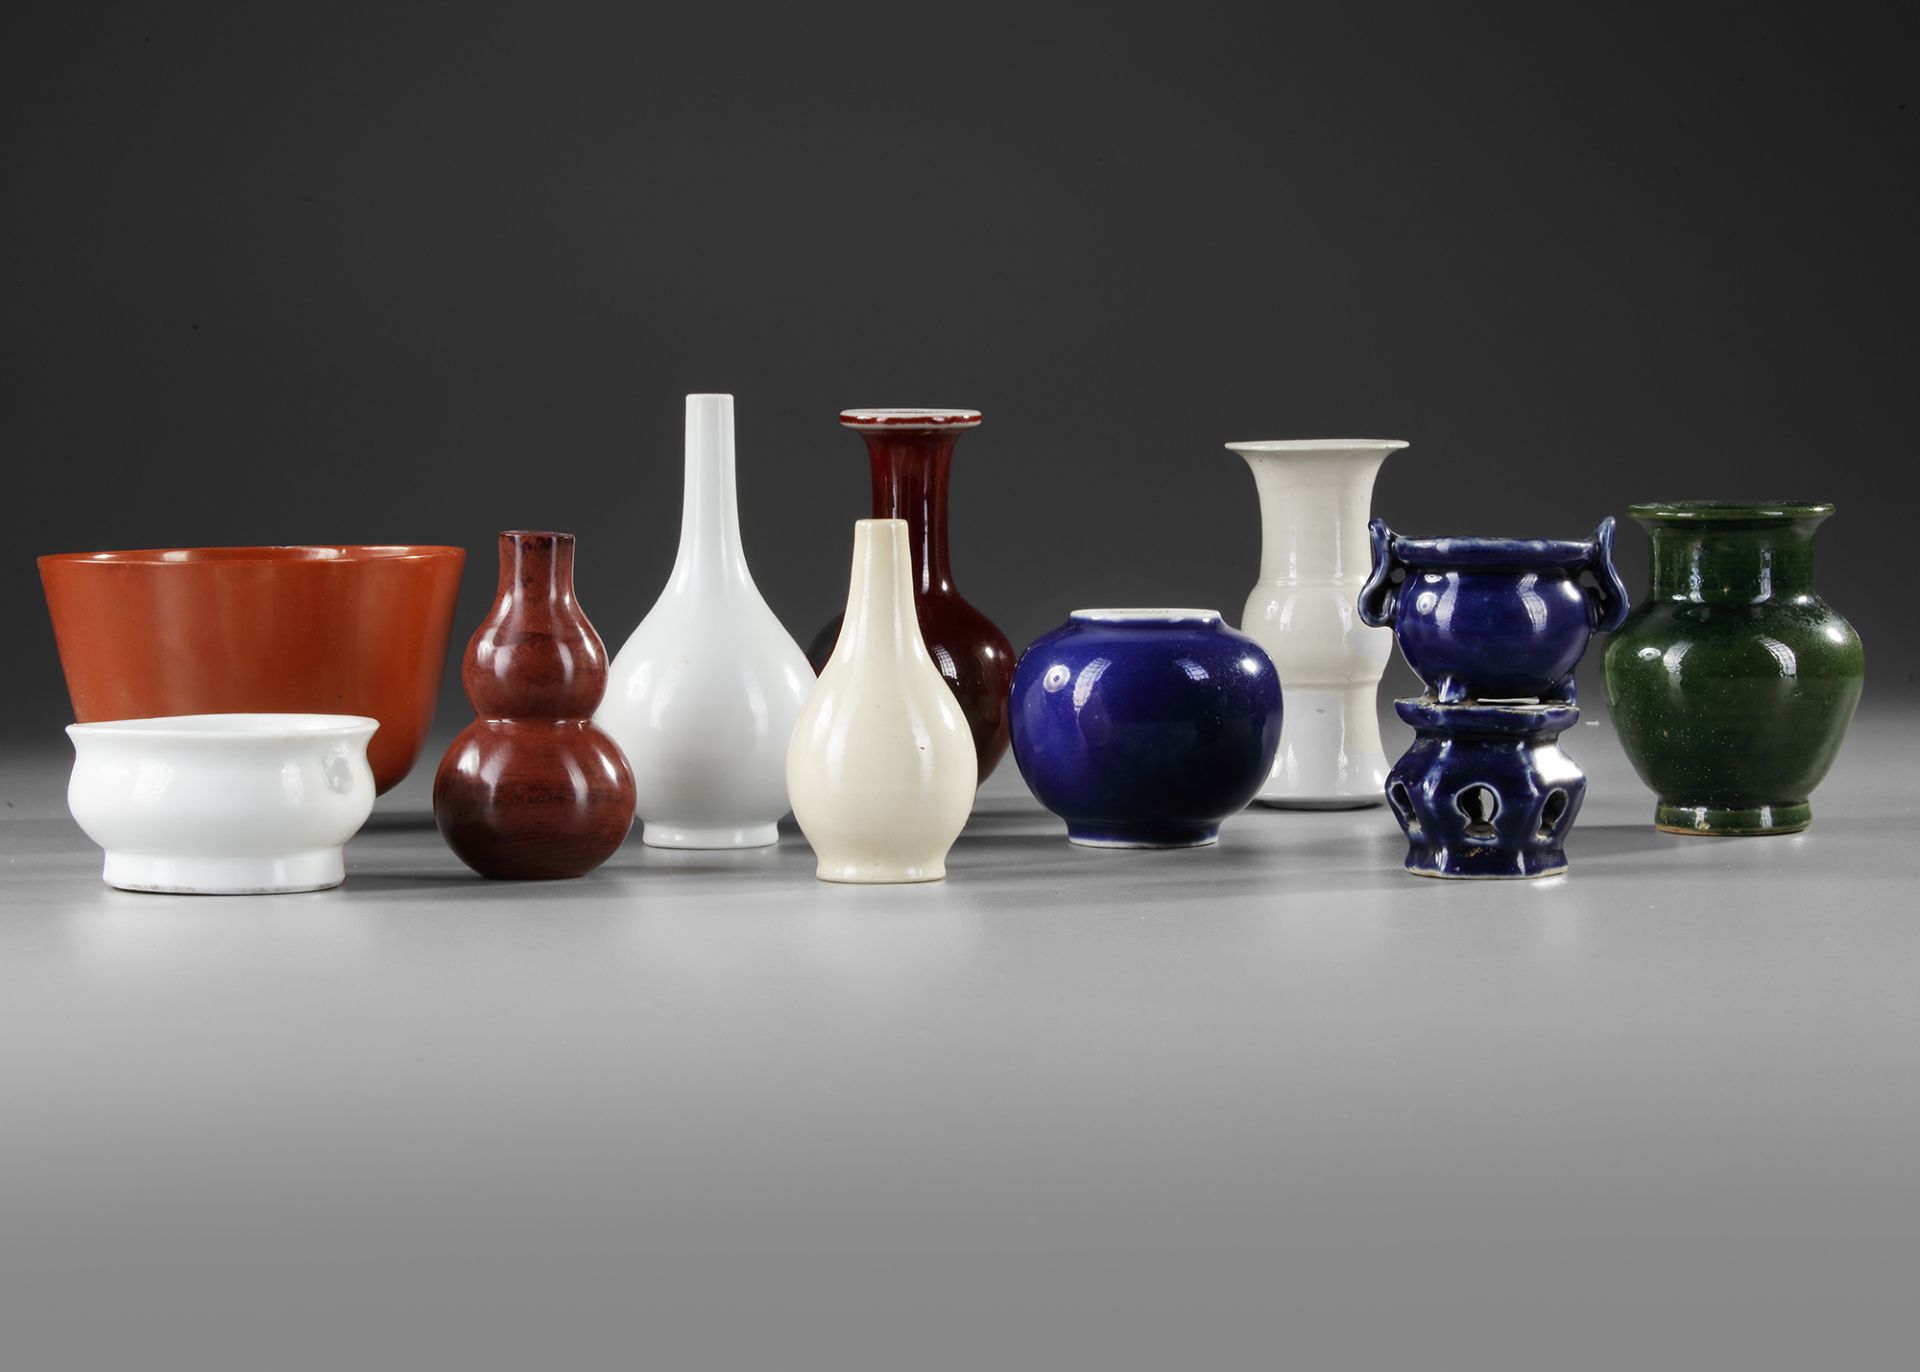 A CHINESE COLLECTION OF 10 MONOCHROME GLAZED PORCELAIN VESSELS, 19TH CENTURY AND LATER - Image 3 of 3